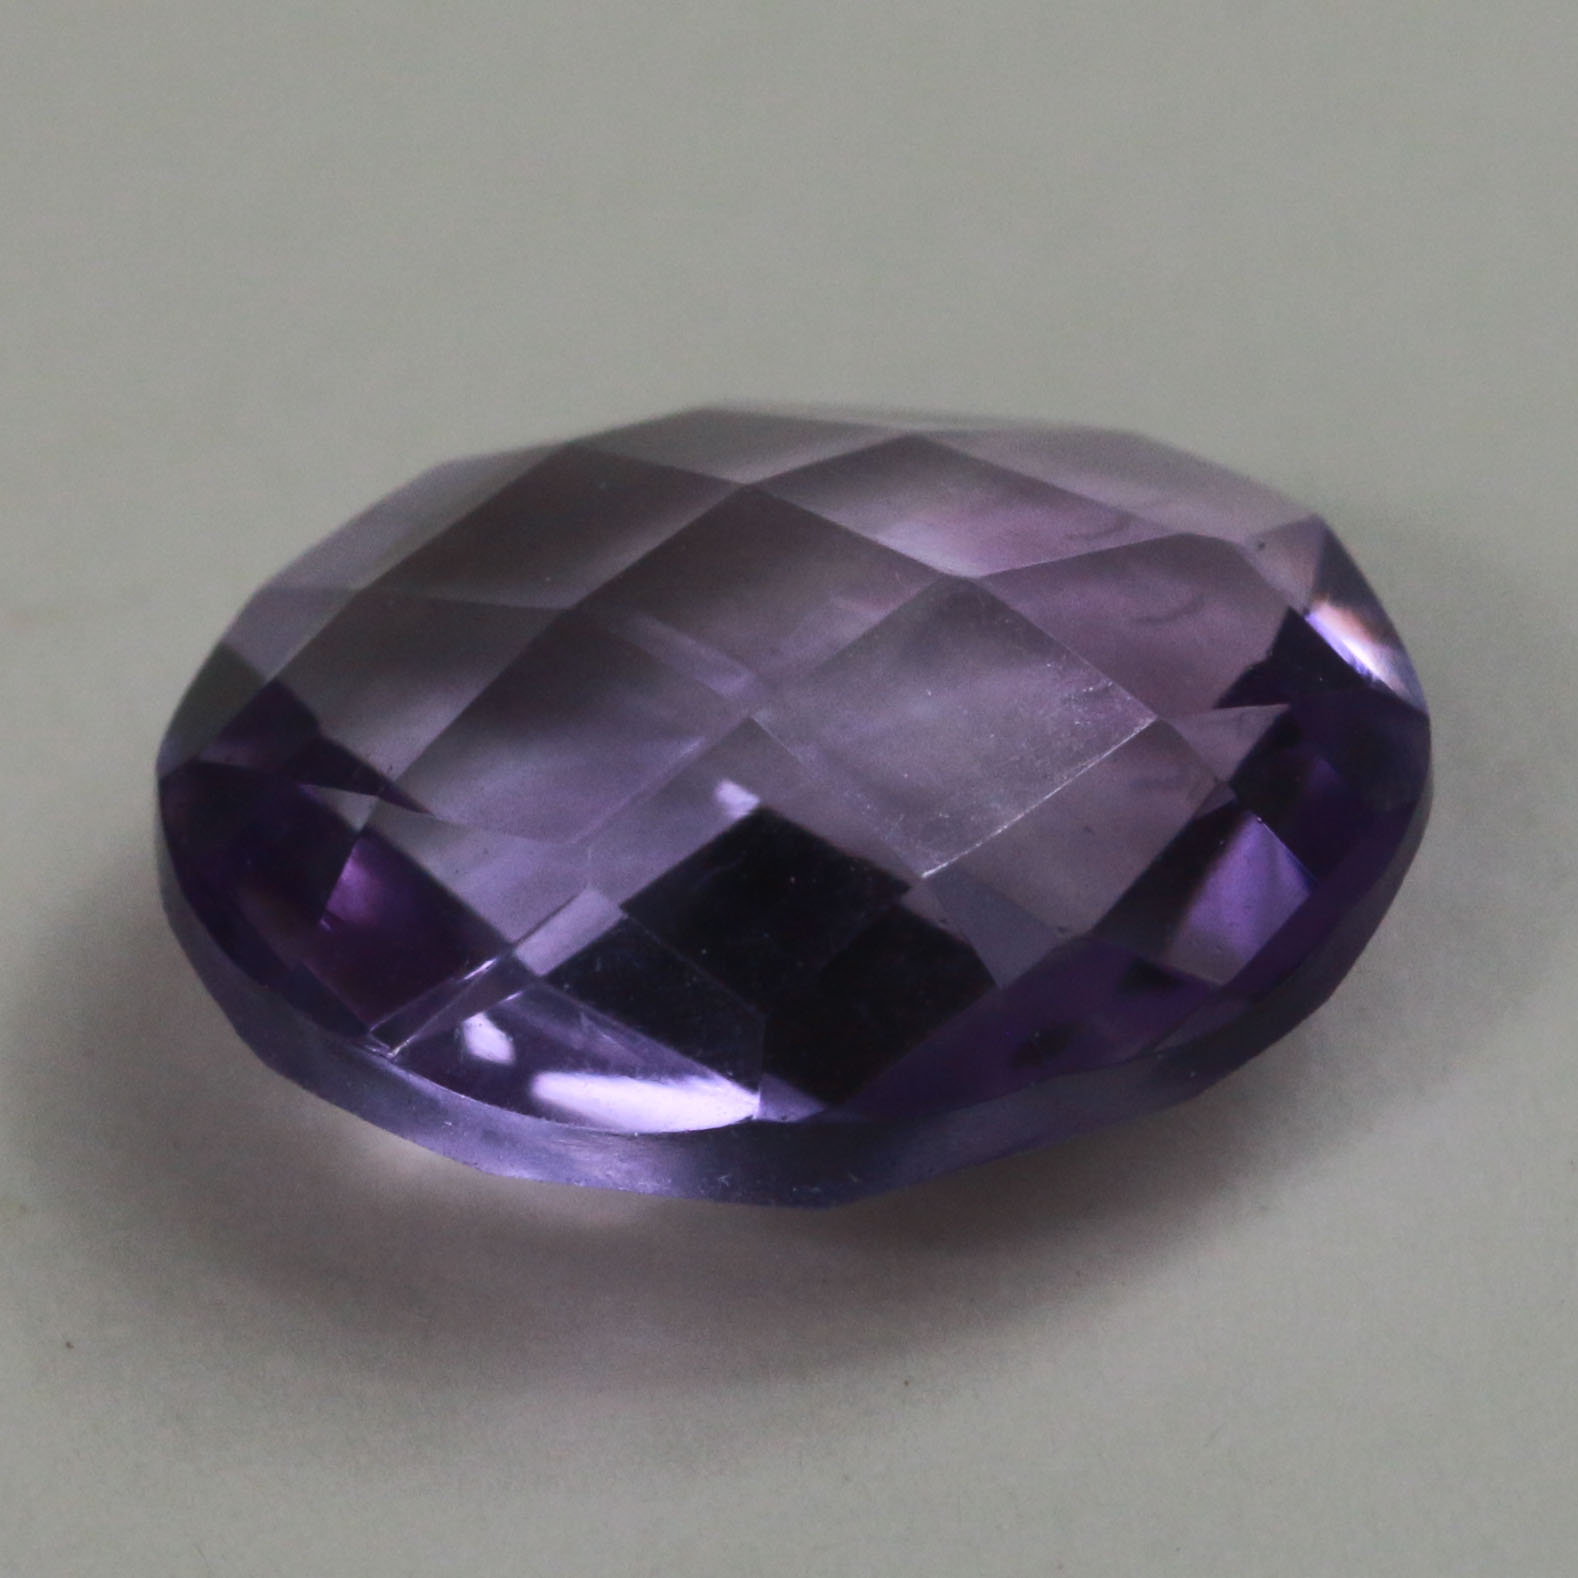 16X12 OVAL BRIOLETTE UNDRILLED AMETHYST LIGHT